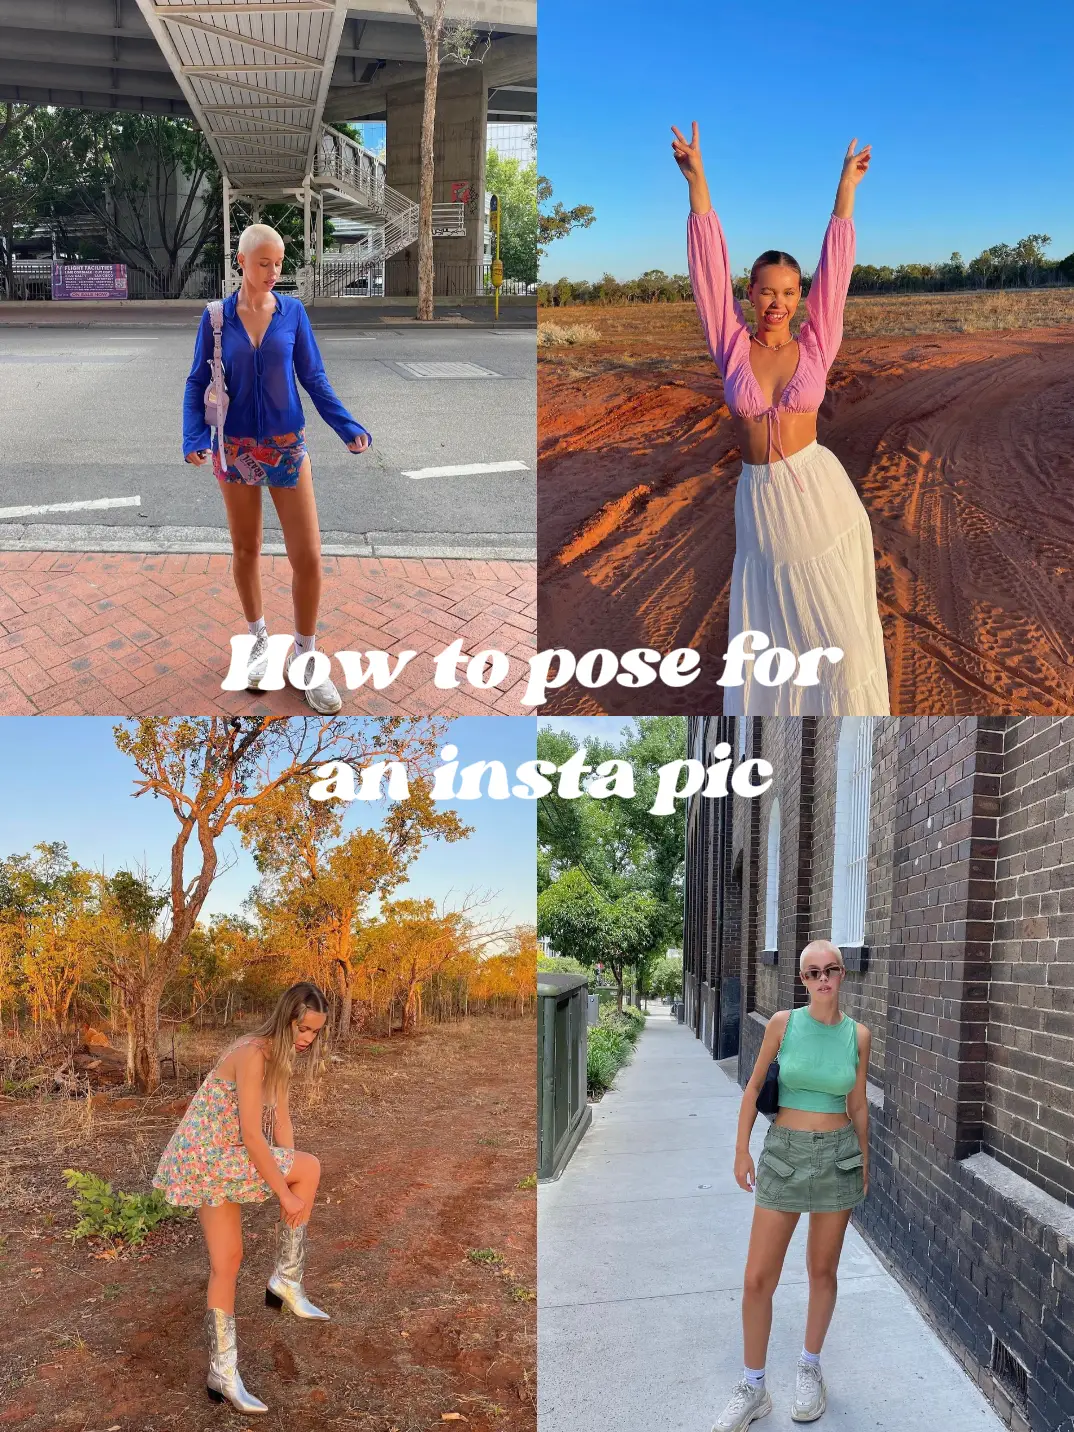 How to pose for an insta pic ⚡️🧡, Gallery posted by Milly Newton